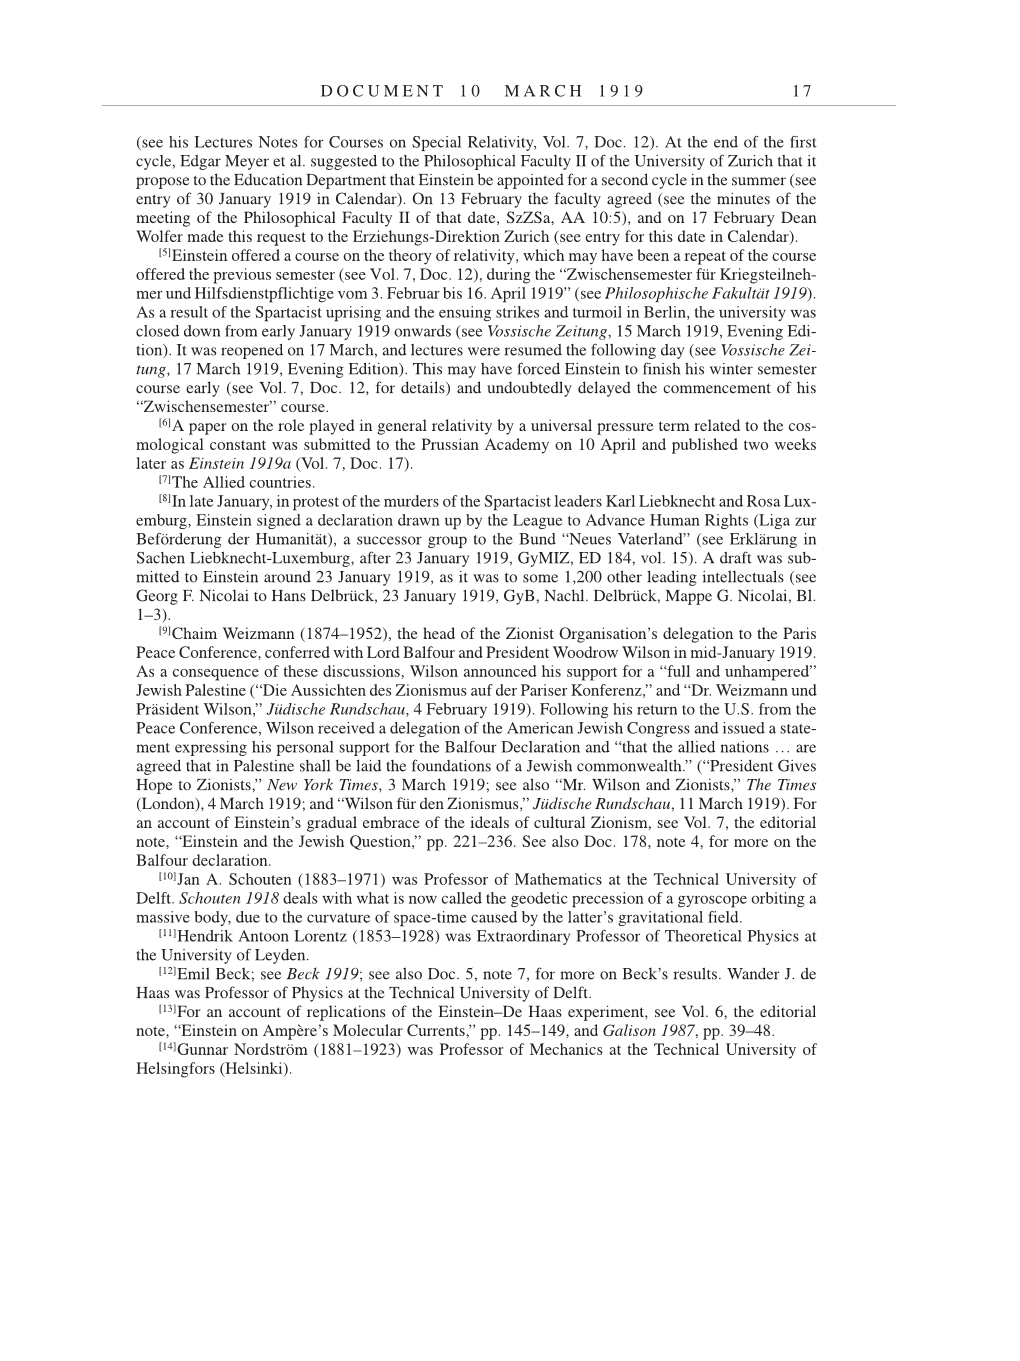 Volume 9: The Berlin Years: Correspondence January 1919-April 1920 page 17